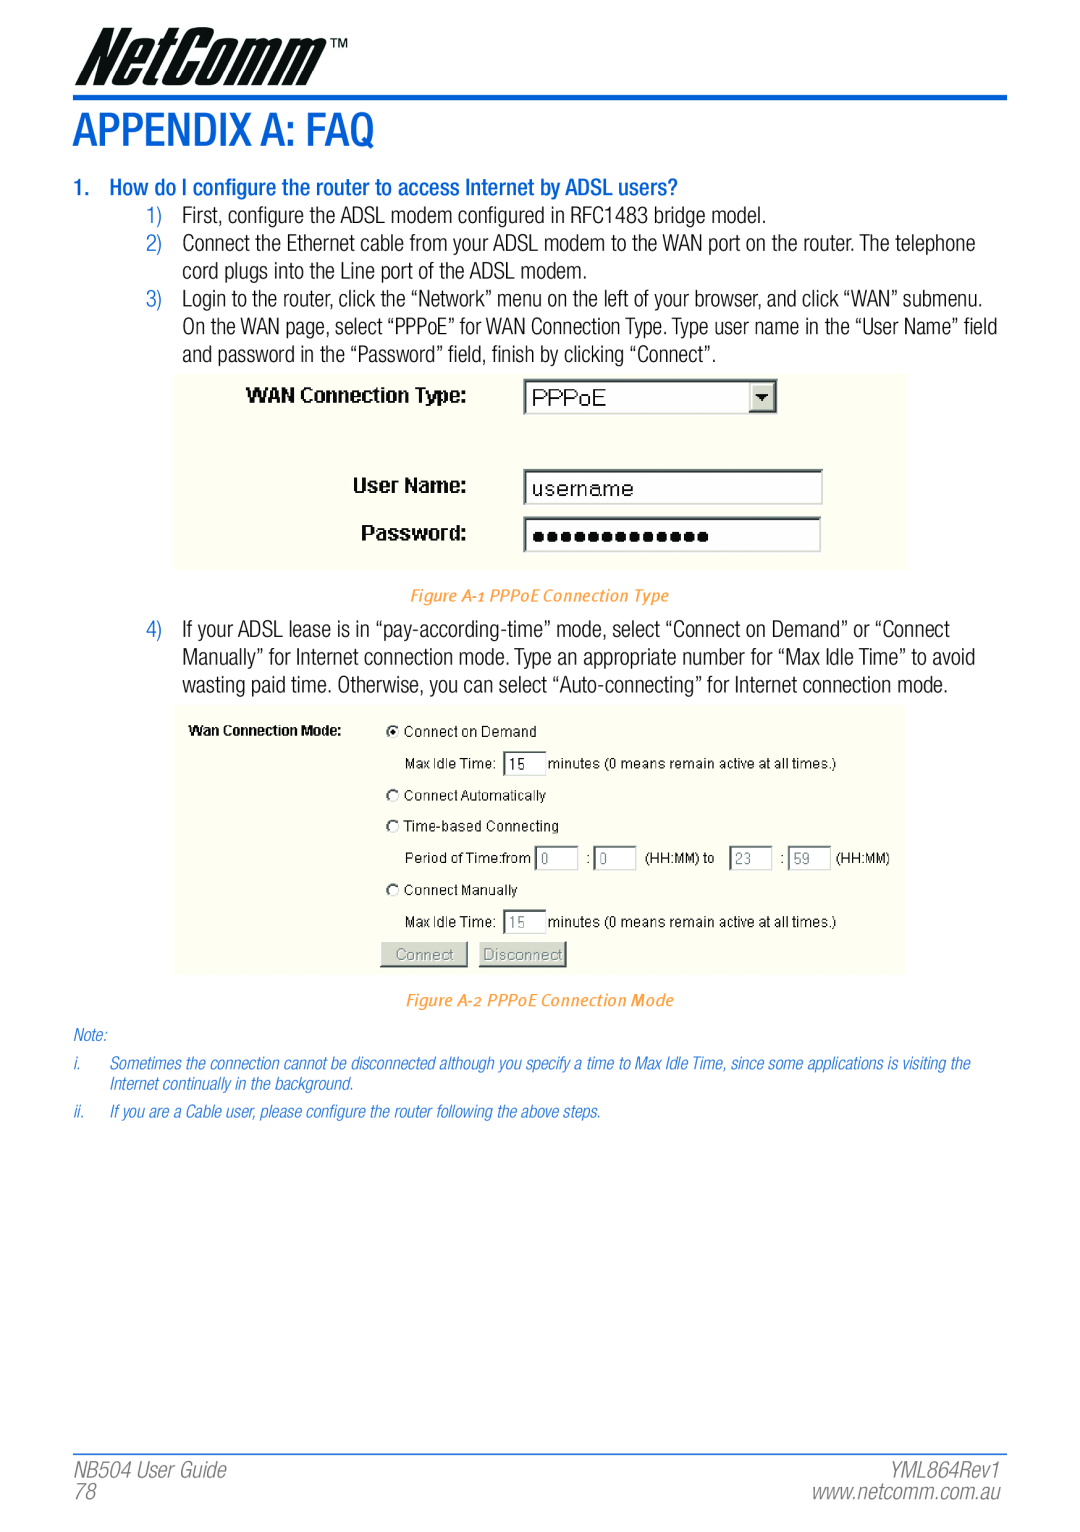 NetComm Appendix A FAQ, How do I configure the router to access Internet by ADSL users?, NB504 User Guide, YML864Rev1 